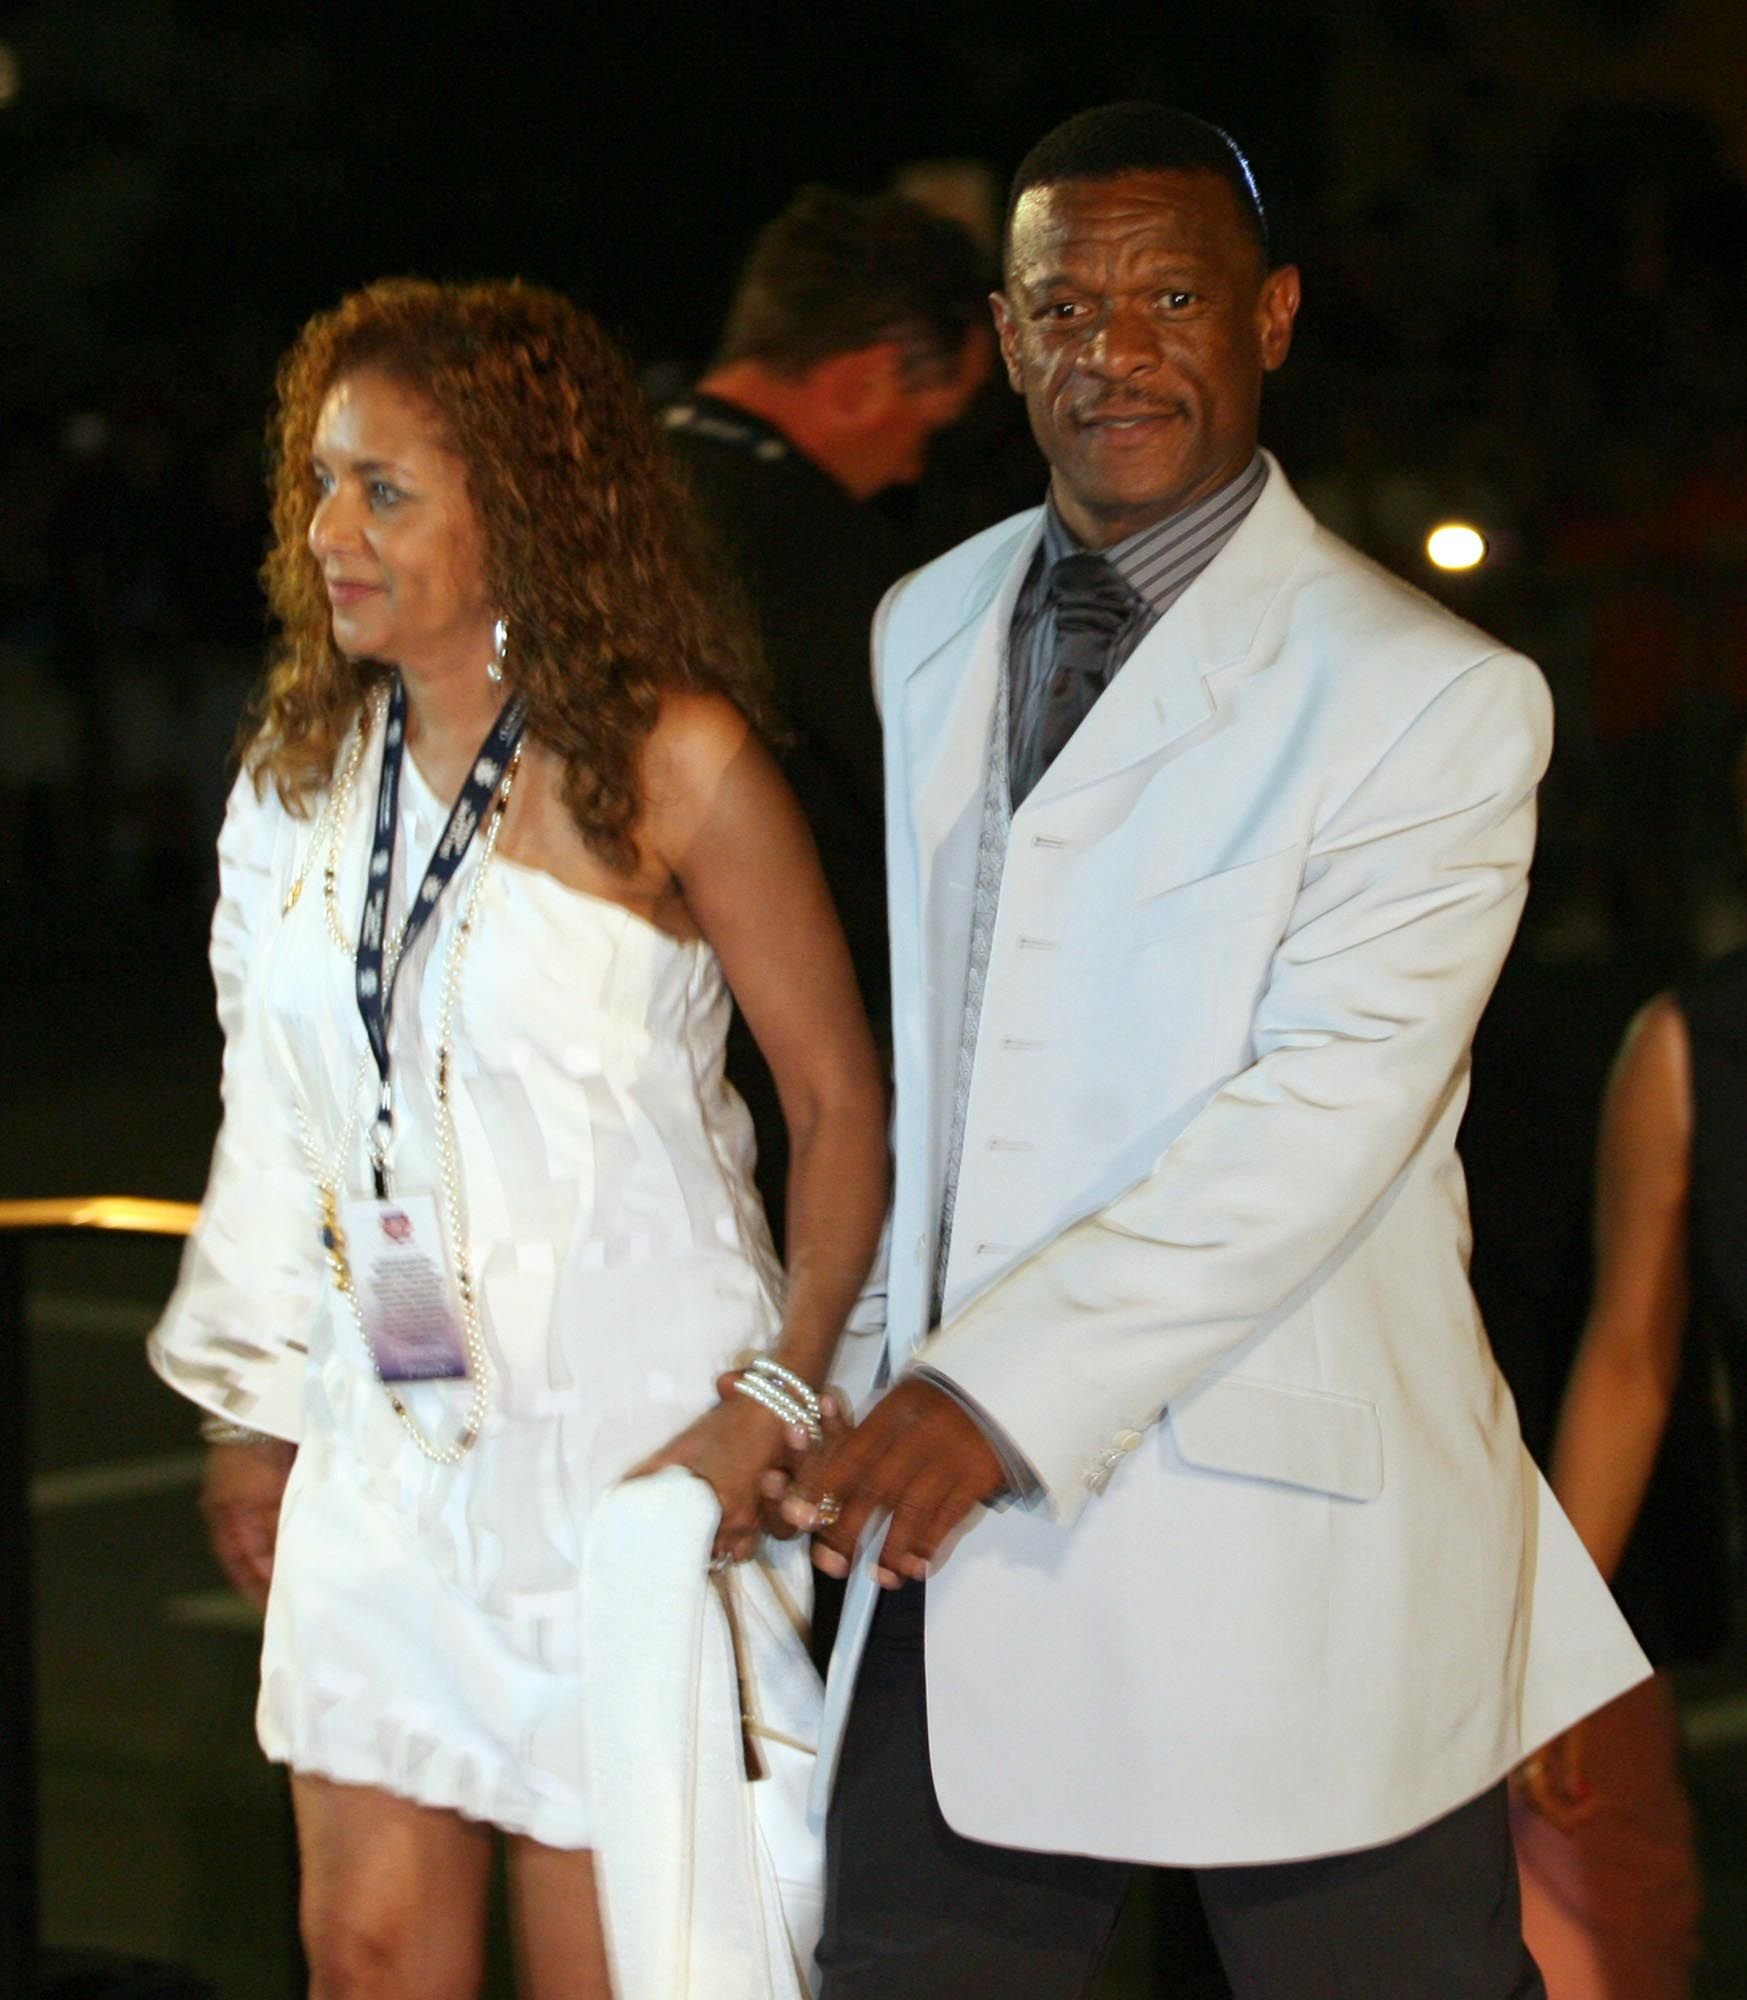 Rickey Henderson attending an event with his wife Pamela | Source: Getty Images